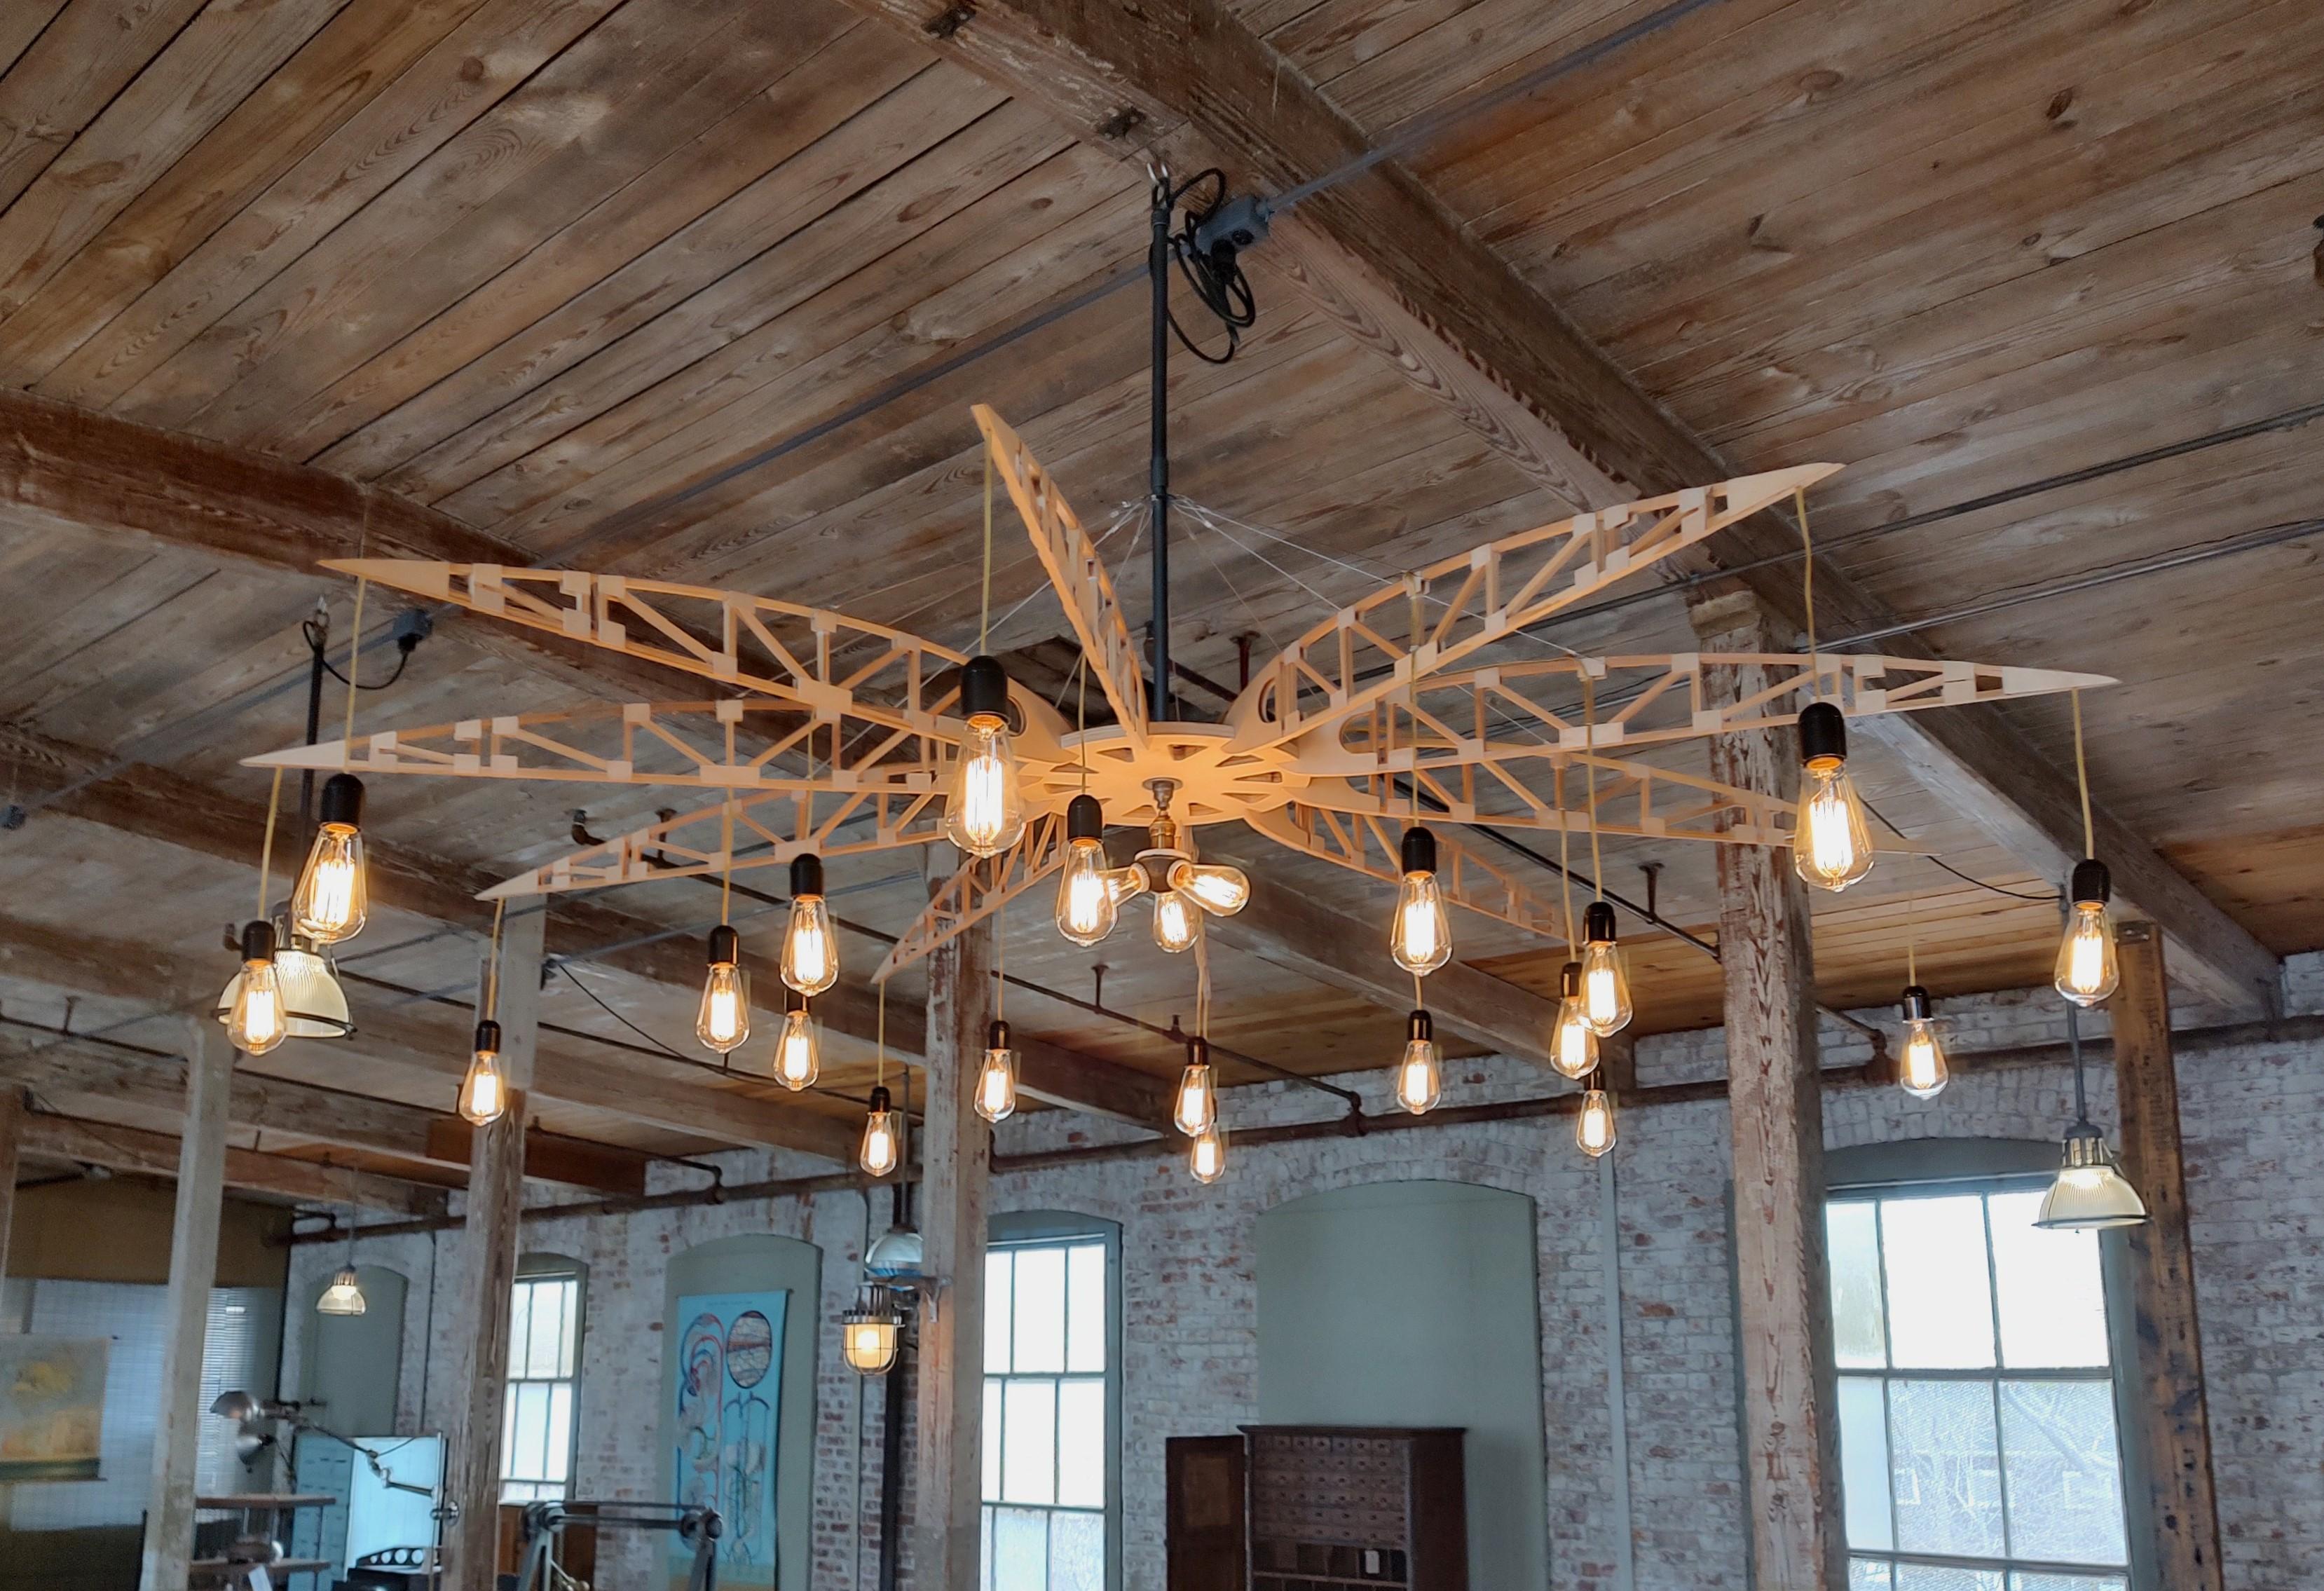 Wooden Airplane Truss Style Chandelier with 23 Bulbs

Featured in Elle Décor May 2017

Dimensions: 93